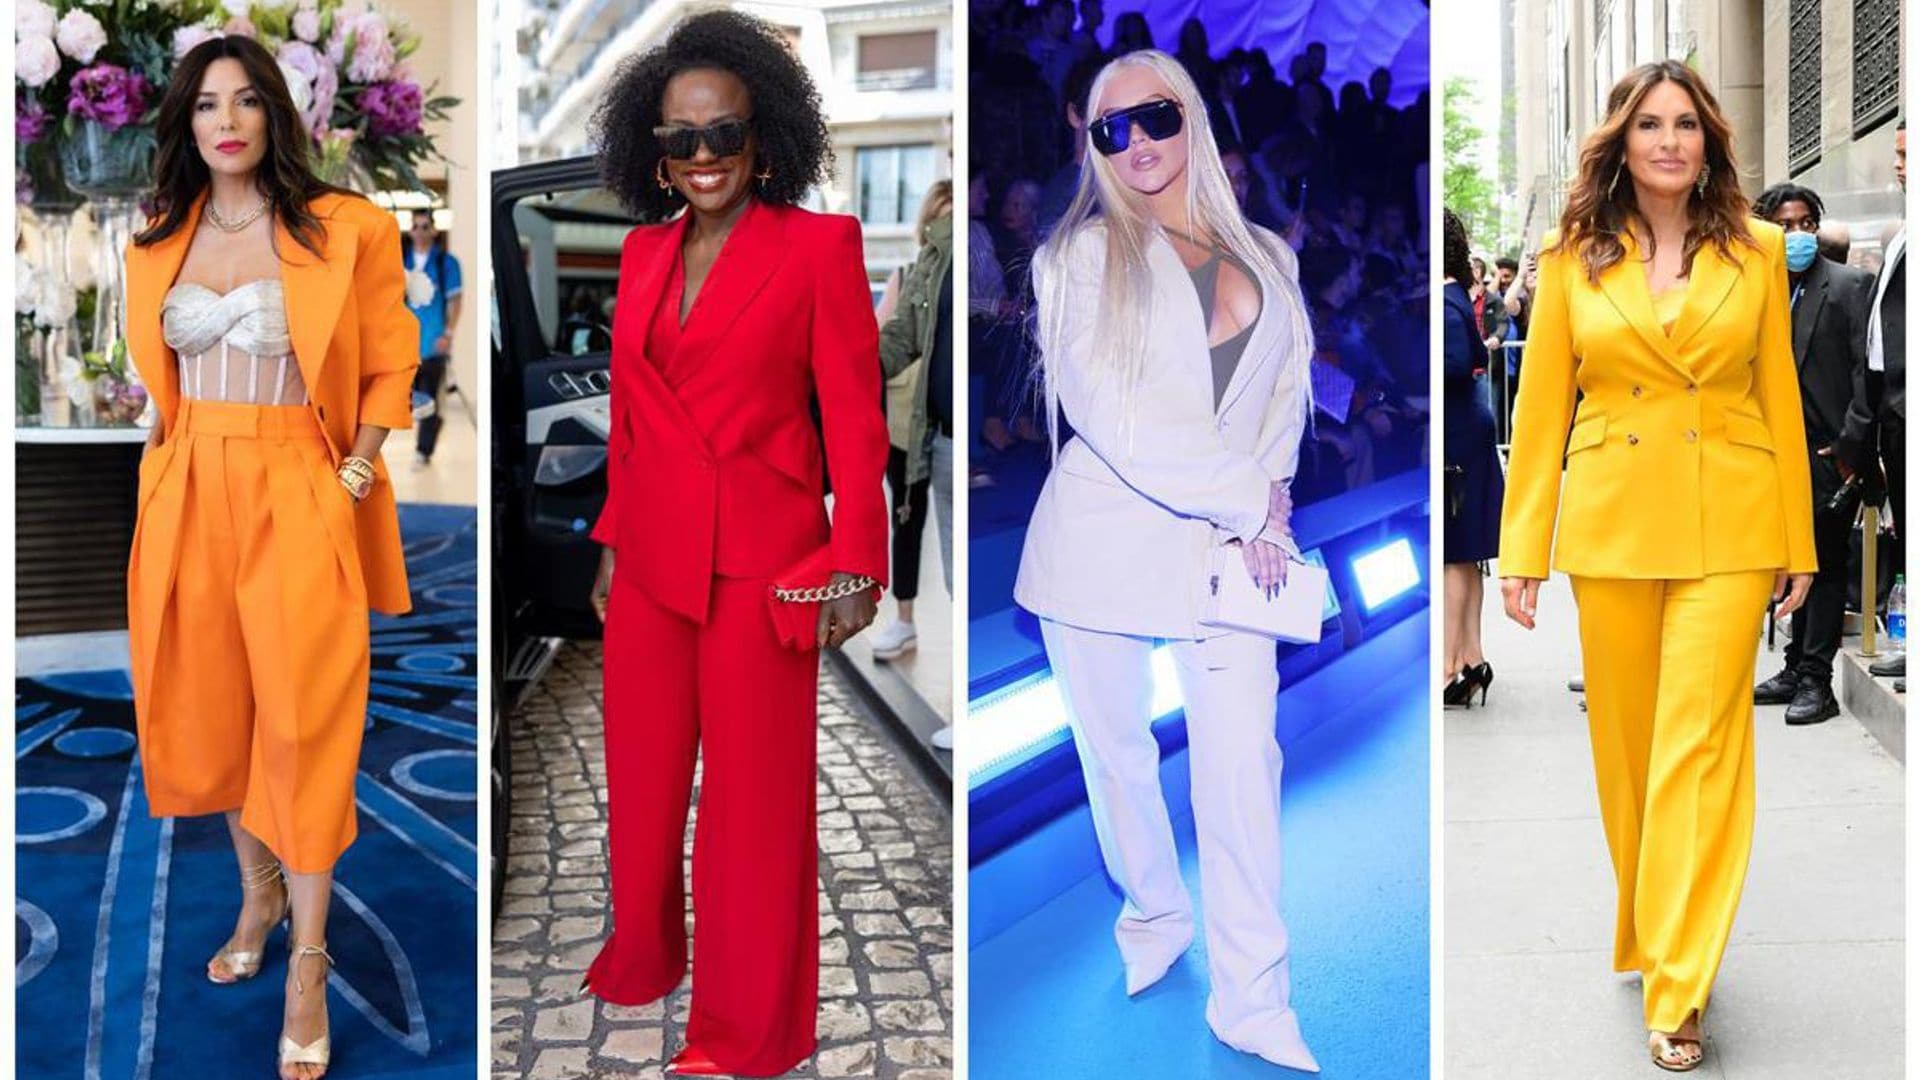 Top Celeb Styles of the Week - May 20th